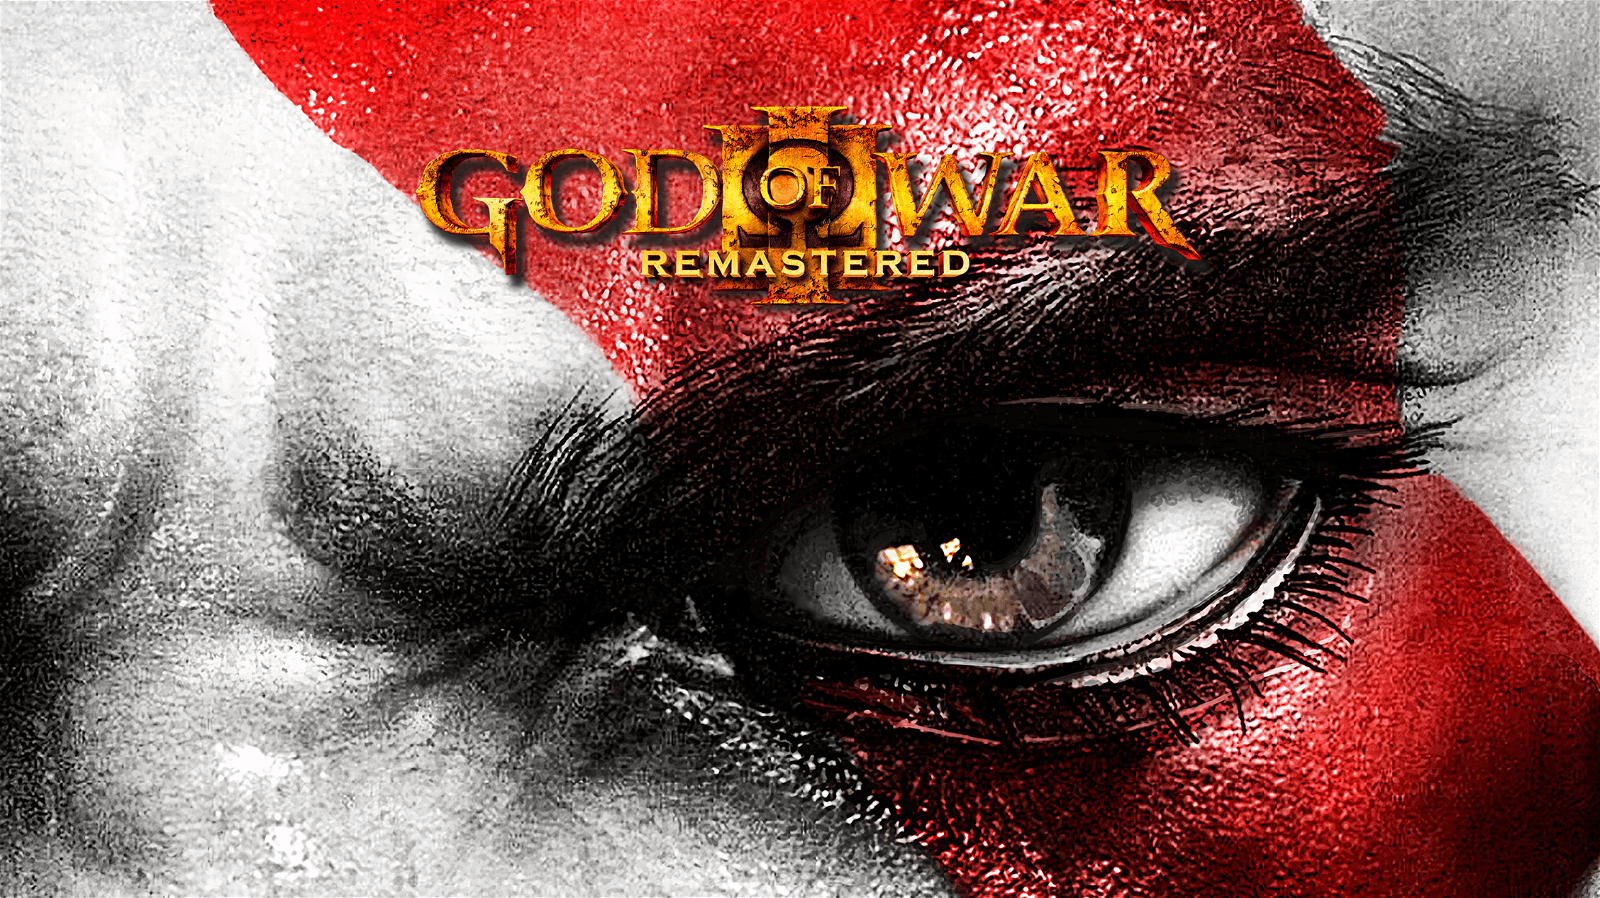 God of War 3 delivers on so many fronts and closes out the trilogy in a strong fashion.